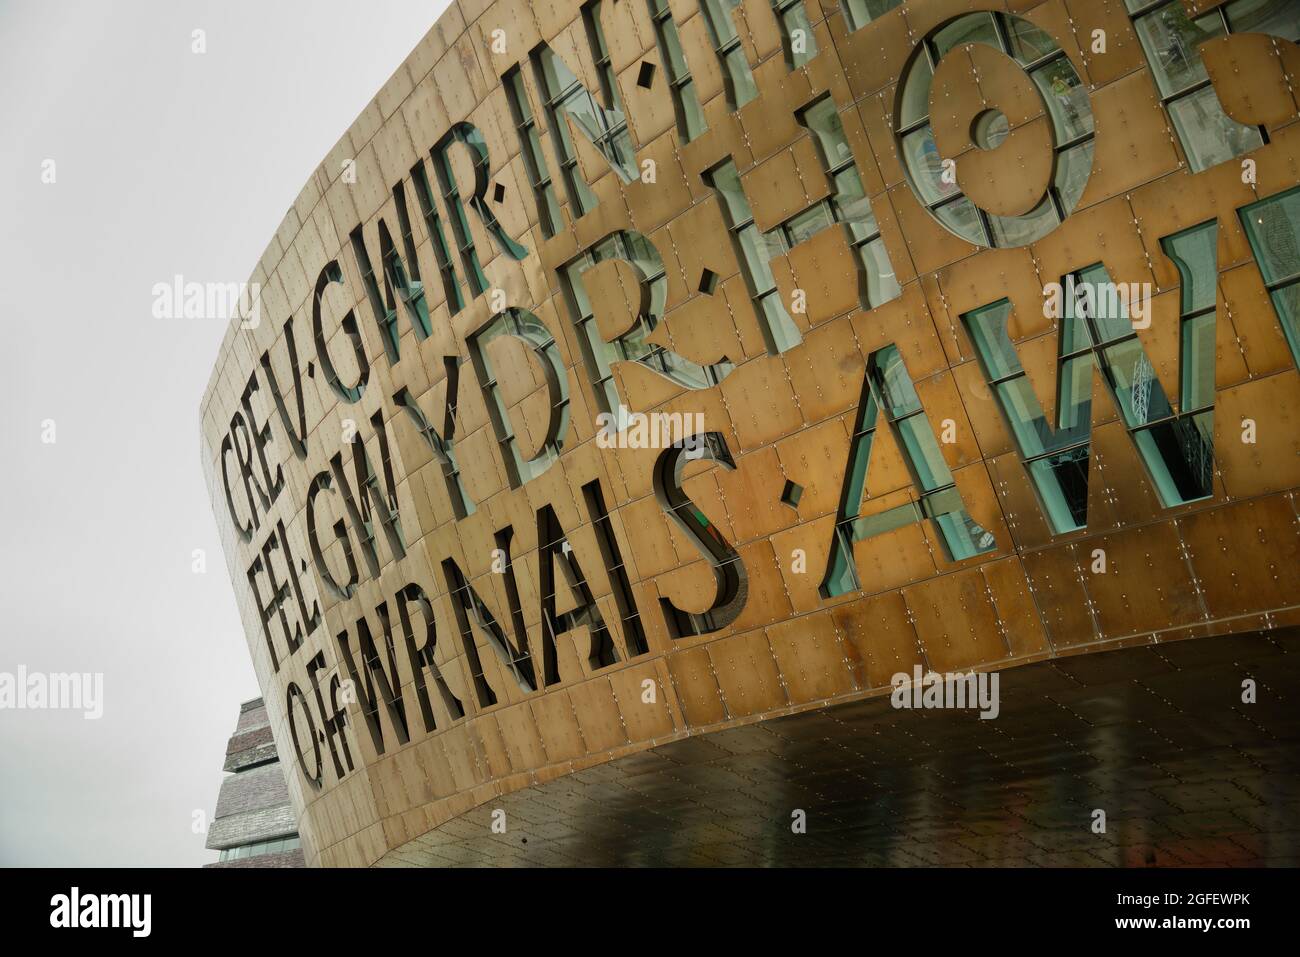 The Wales Millennium Centre, at Cardiff bay. Home to various arts organisations including the Welsh National Opera. 'In These Stones, Horizons Sing' Stock Photo